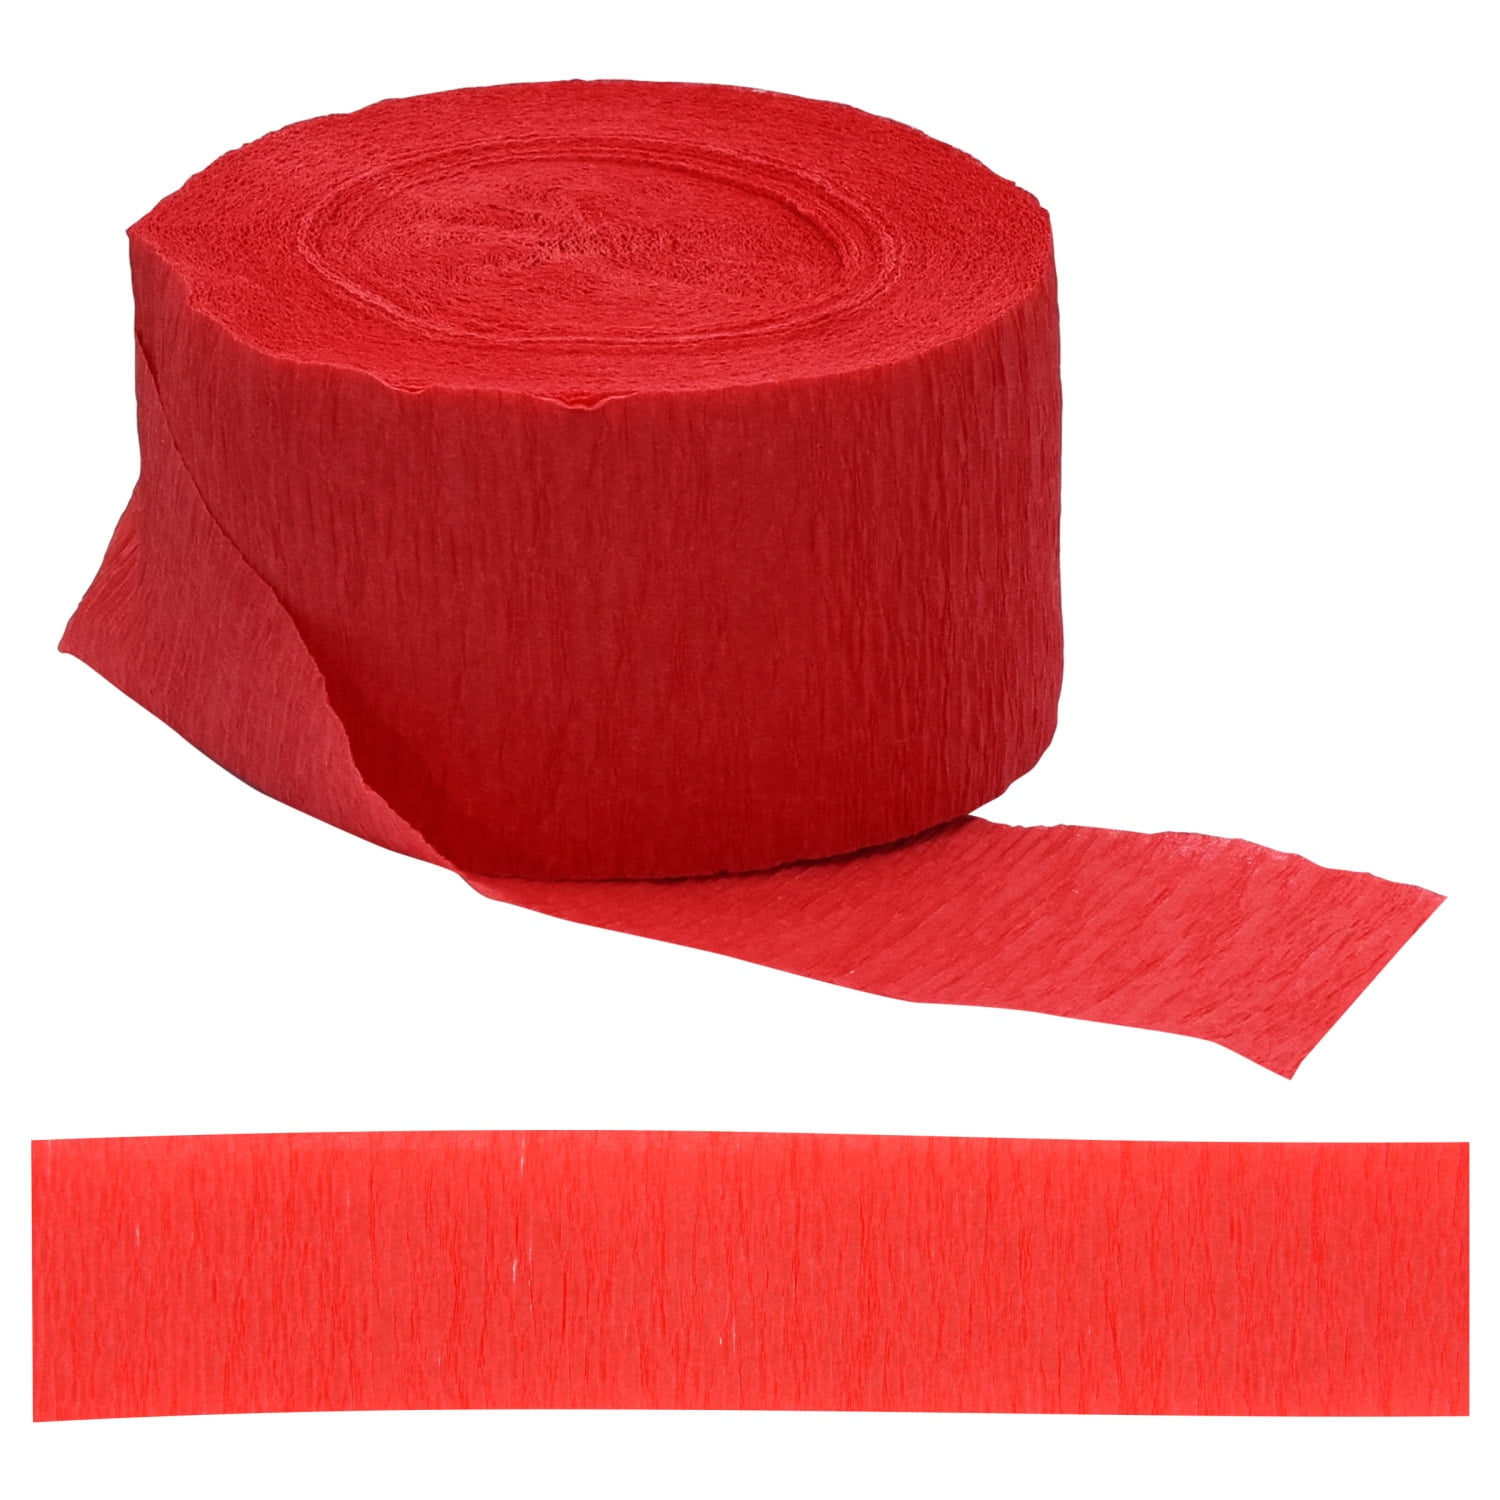  Red and White Crepe Paper Streamers - 6 Rolls Party Streamers  for Valentine's Day,Wedding,Birthdy Party Decorations : Home & Kitchen